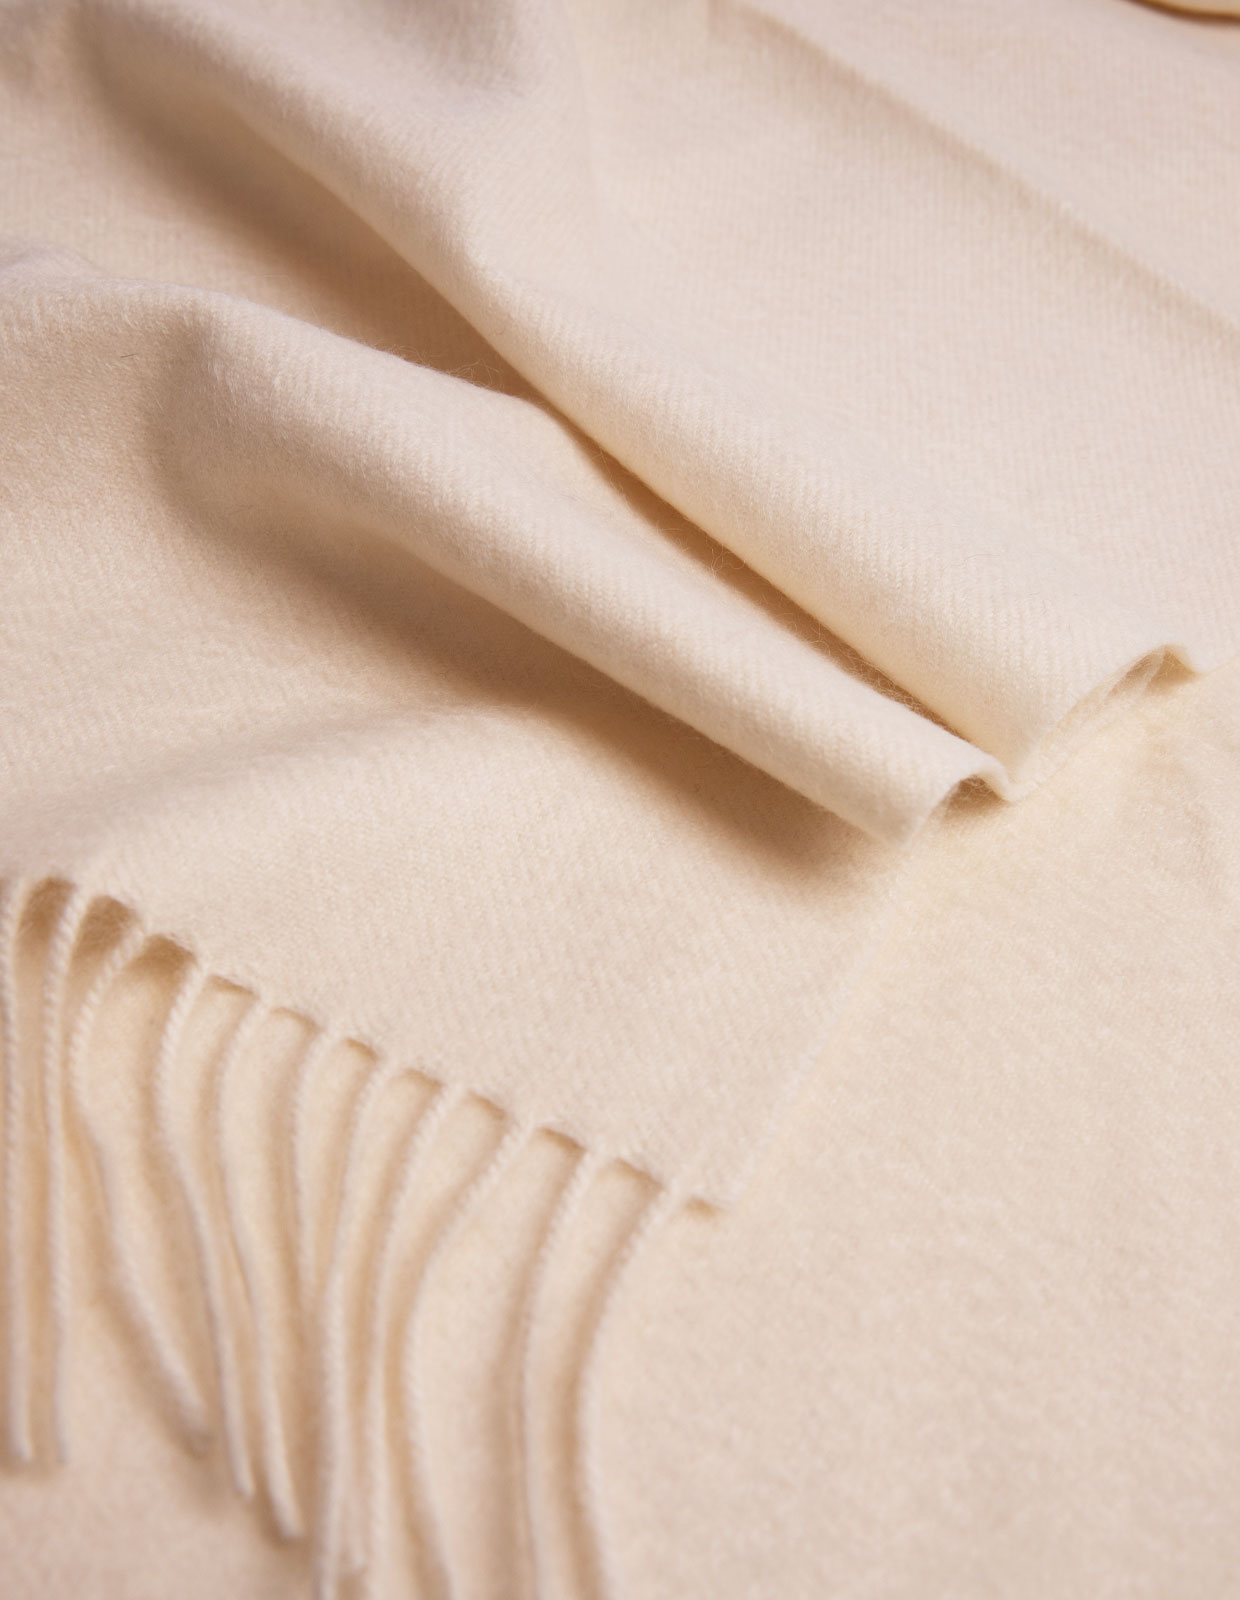 Cashmere Scarf Solid Offwhite